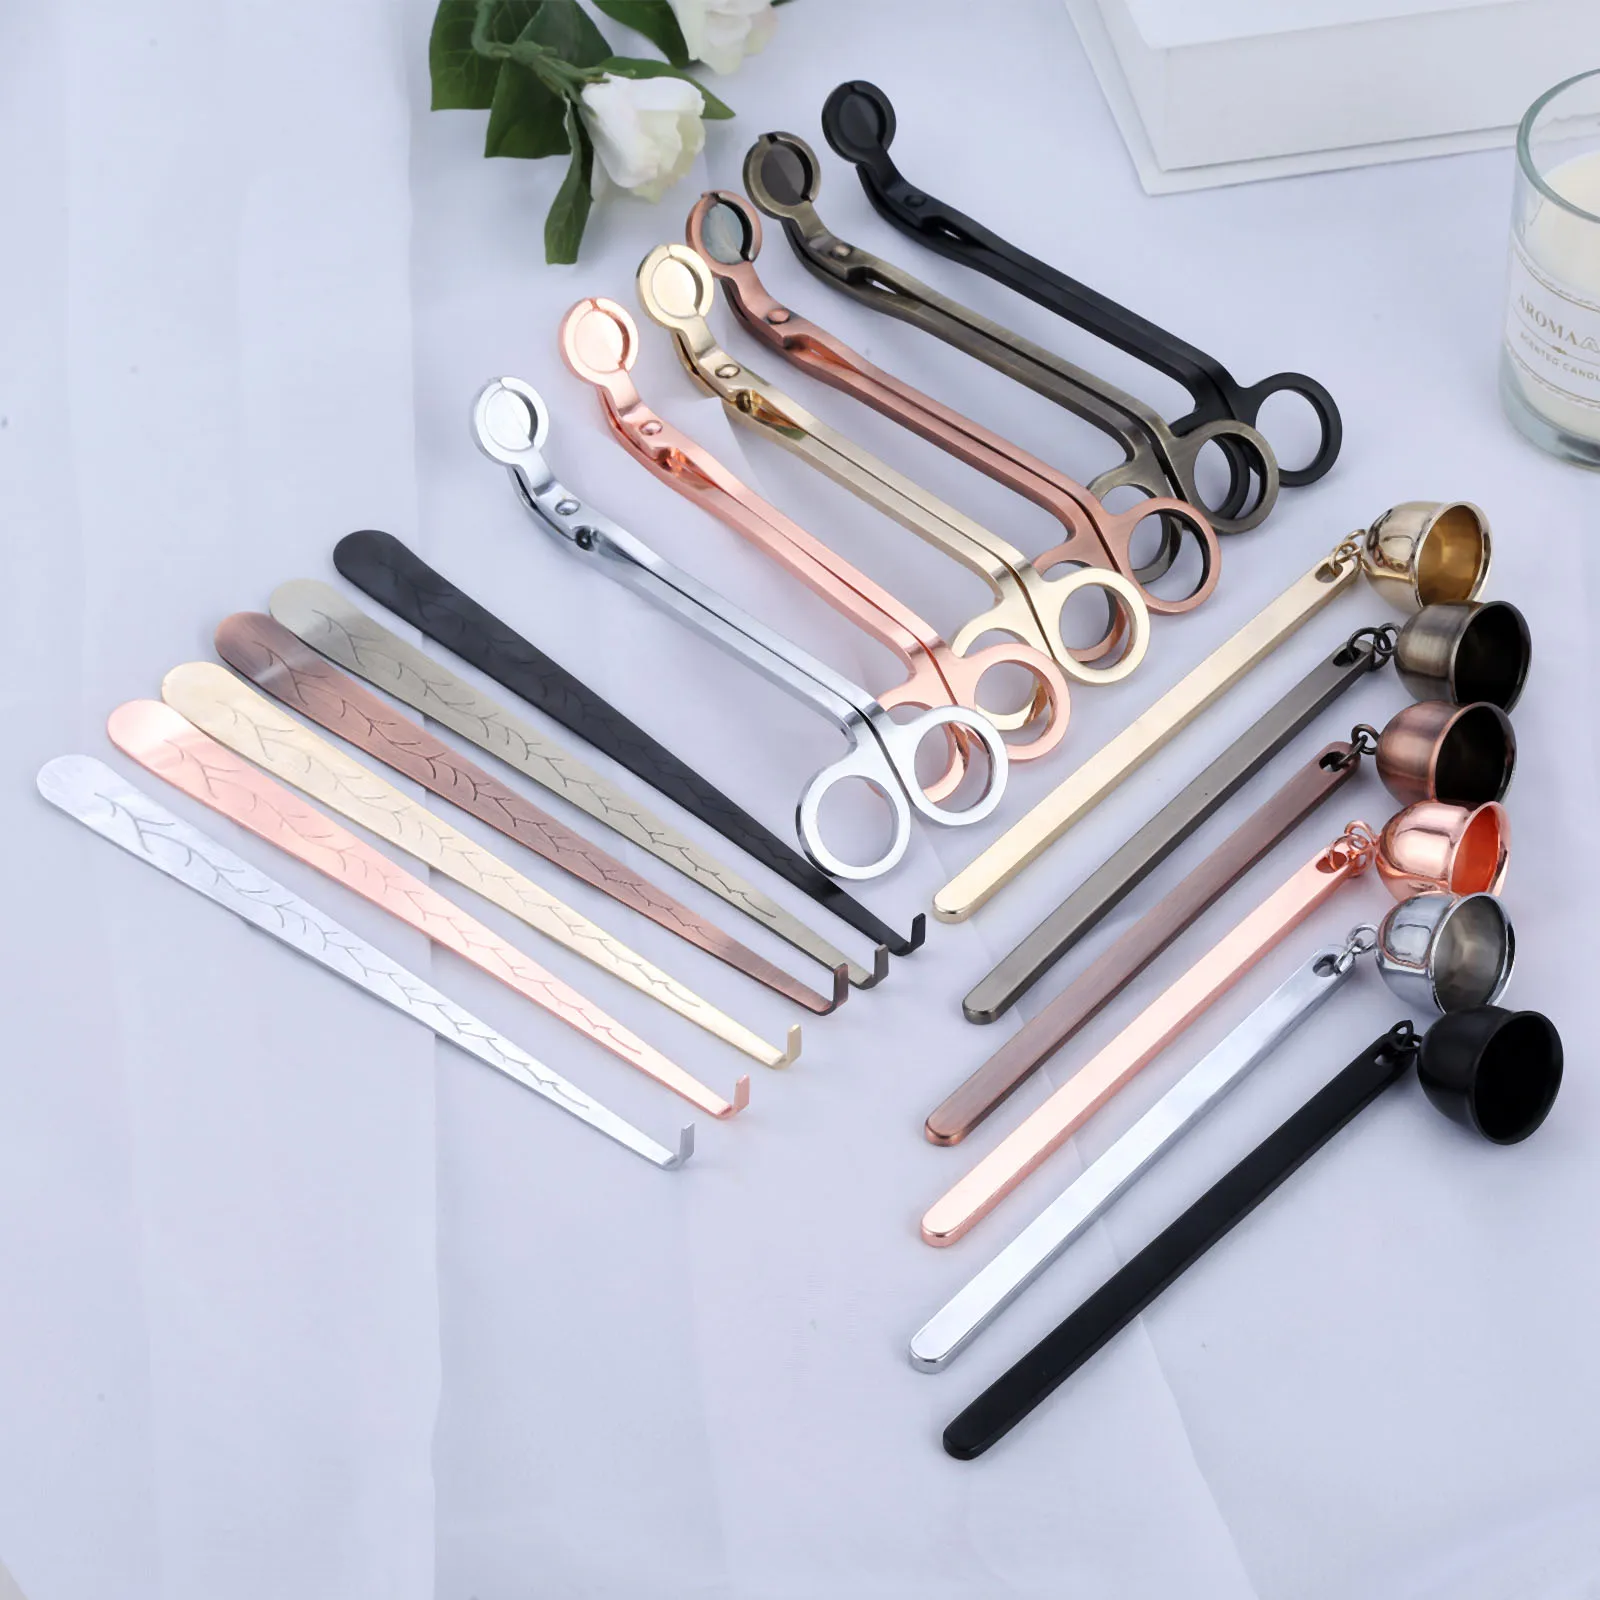 

3pcs/set Candle Care Kit Candle Extinguisher Candle Scissors Candle Bells Candle Cover Home Decoration Candle Repair Tool Kit